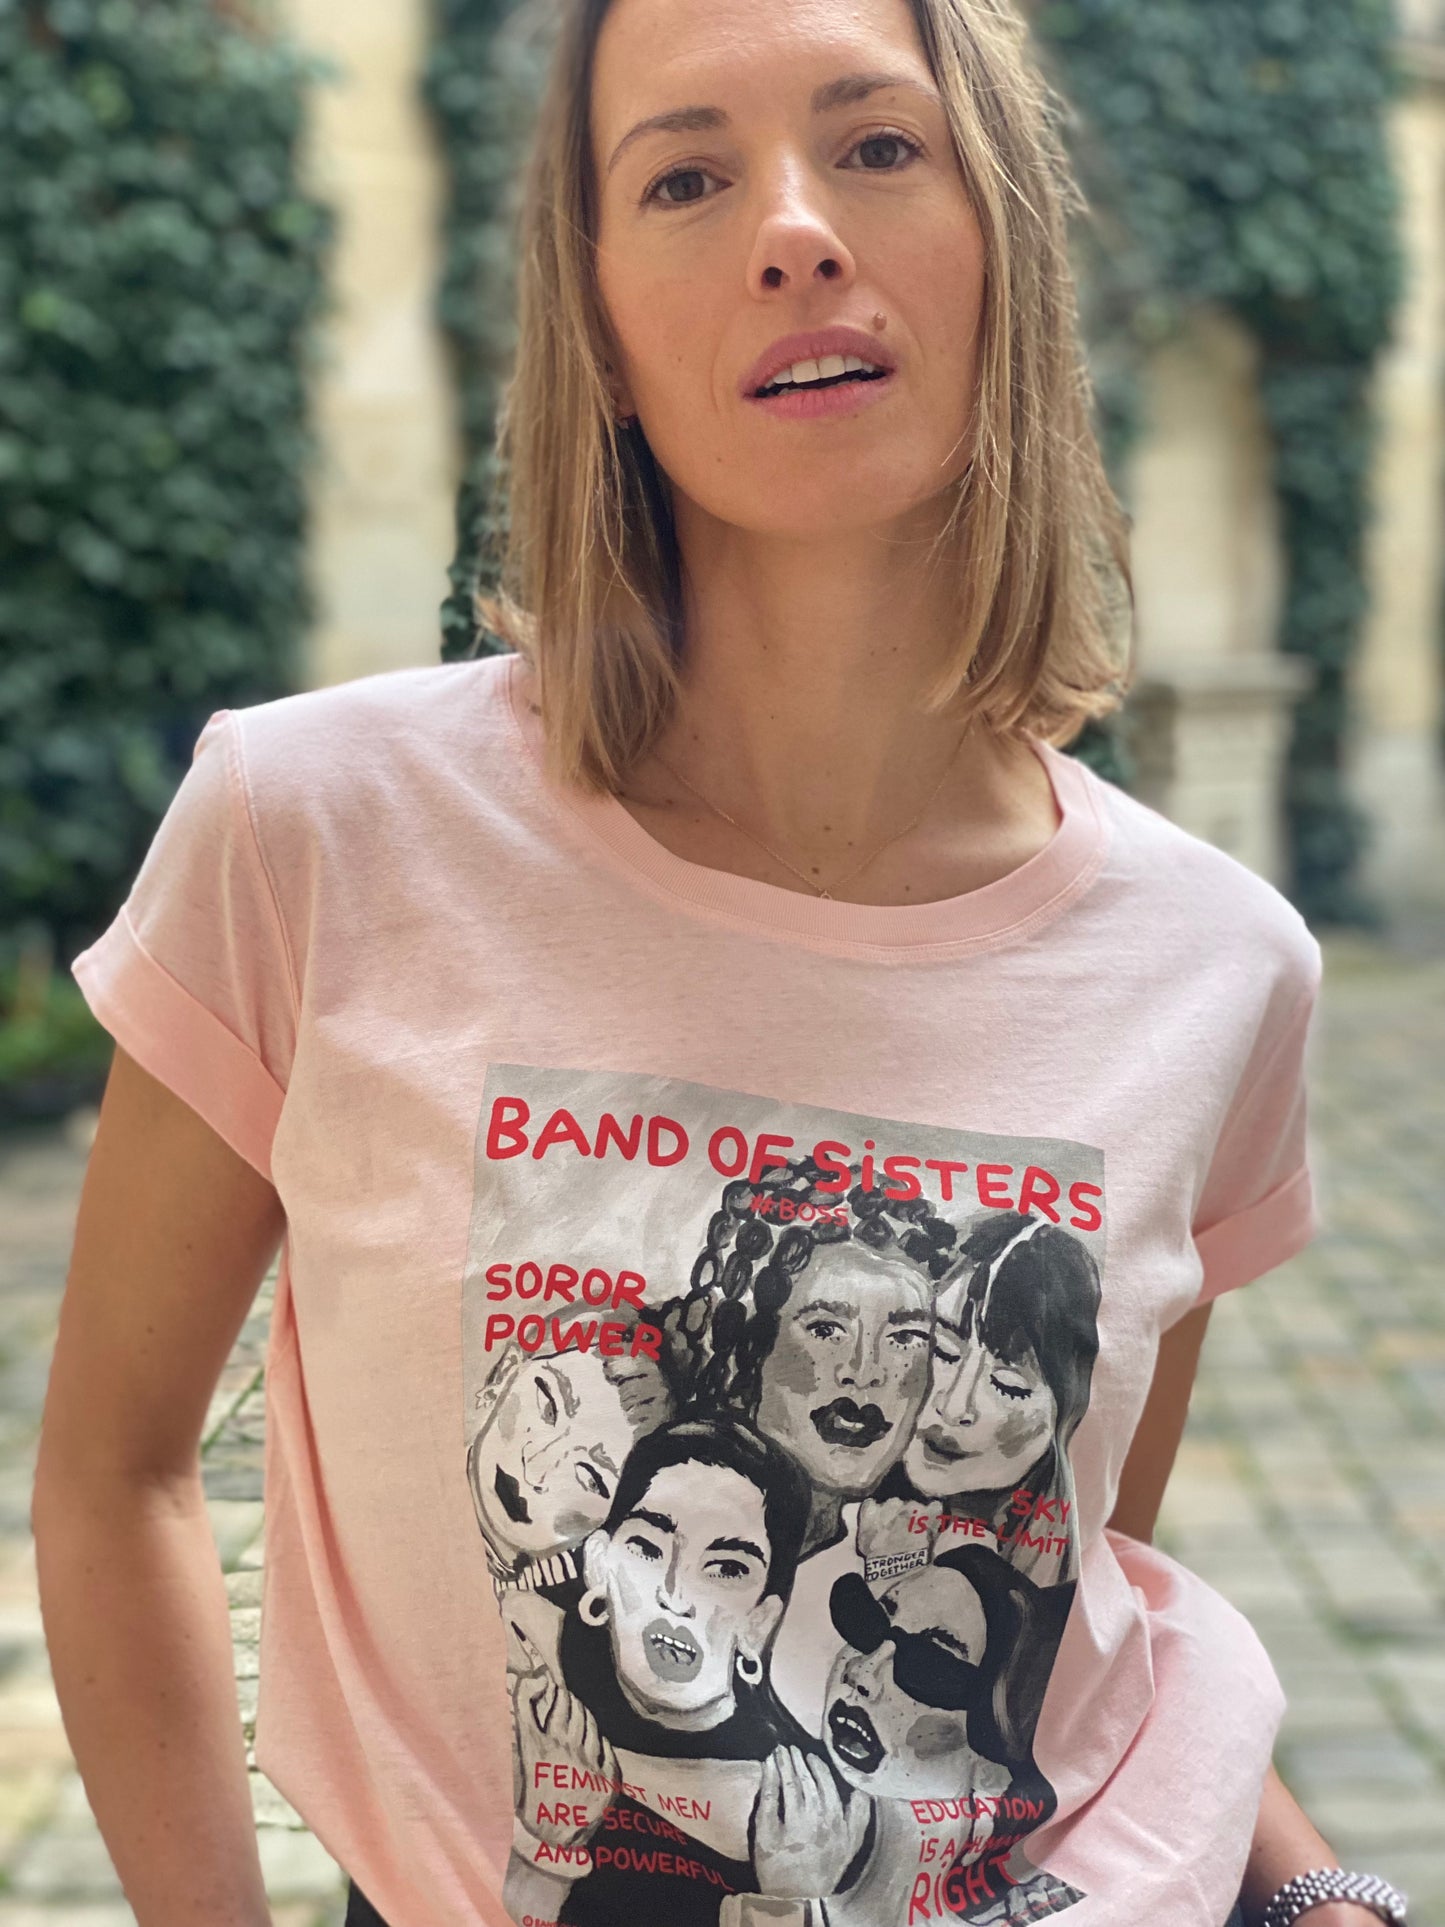 BAND OF SISTERS COVER 2 / TEE SHIRT